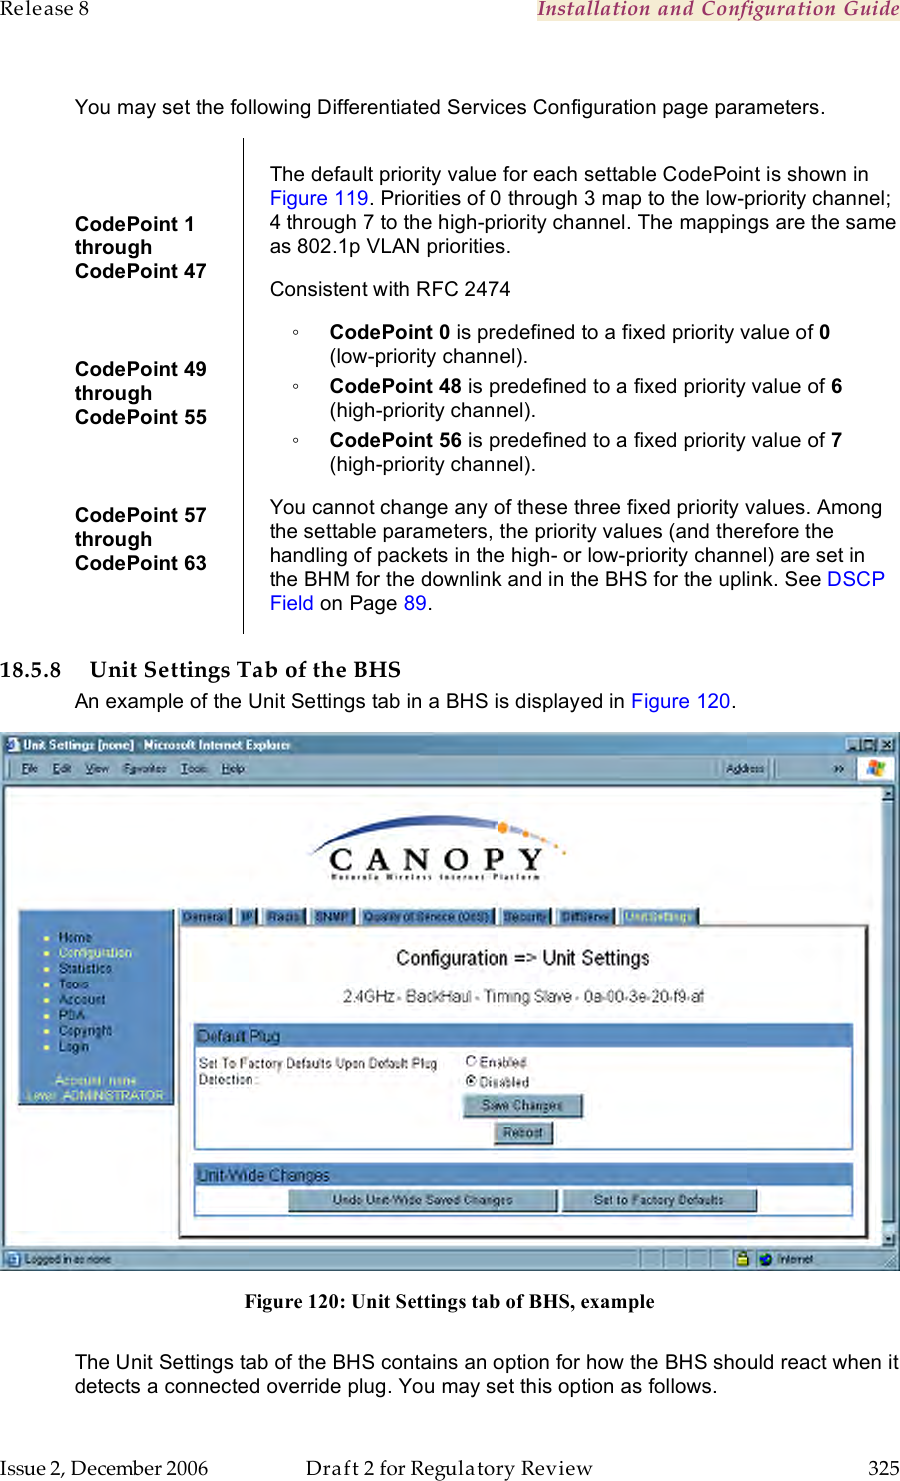 Release 8    Installation and Configuration Guide   Issue 2, December 2006  Draft 2 for Regulatory Review  325      You may set the following Differentiated Services Configuration page parameters.  CodePoint 1  through  CodePoint 47  CodePoint 49  through  CodePoint 55  CodePoint 57  through  CodePoint 63  The default priority value for each settable CodePoint is shown in Figure 119. Priorities of 0 through 3 map to the low-priority channel; 4 through 7 to the high-priority channel. The mappings are the same as 802.1p VLAN priorities. Consistent with RFC 2474 ◦ CodePoint 0 is predefined to a fixed priority value of 0  (low-priority channel). ◦ CodePoint 48 is predefined to a fixed priority value of 6 (high-priority channel). ◦ CodePoint 56 is predefined to a fixed priority value of 7 (high-priority channel). You cannot change any of these three fixed priority values. Among the settable parameters, the priority values (and therefore the handling of packets in the high- or low-priority channel) are set in the BHM for the downlink and in the BHS for the uplink. See DSCP Field on Page 89. 18.5.8 Unit Settings Tab of the BHS An example of the Unit Settings tab in a BHS is displayed in Figure 120.  Figure 120: Unit Settings tab of BHS, example  The Unit Settings tab of the BHS contains an option for how the BHS should react when it detects a connected override plug. You may set this option as follows. 